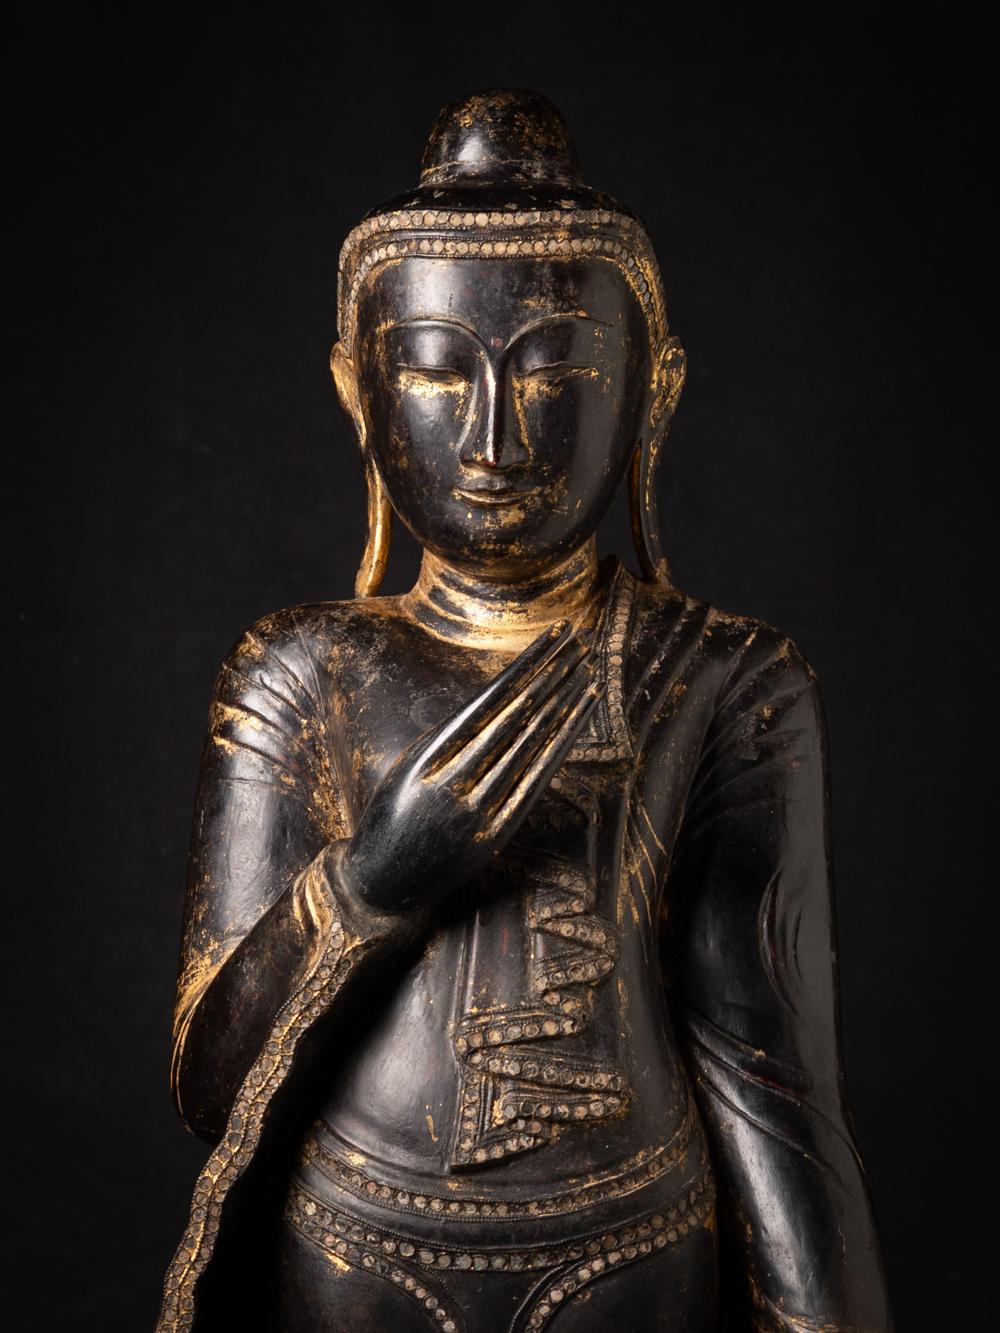 This Special antique wooden Burmese Buddha statue is a truly unique and special collectible piece. Standing at 114,5 cm high, 40,5 cm wide and 24 cm deep, it is made of wood and it weighs 16,05 kgs. The intricate details on the statue are with